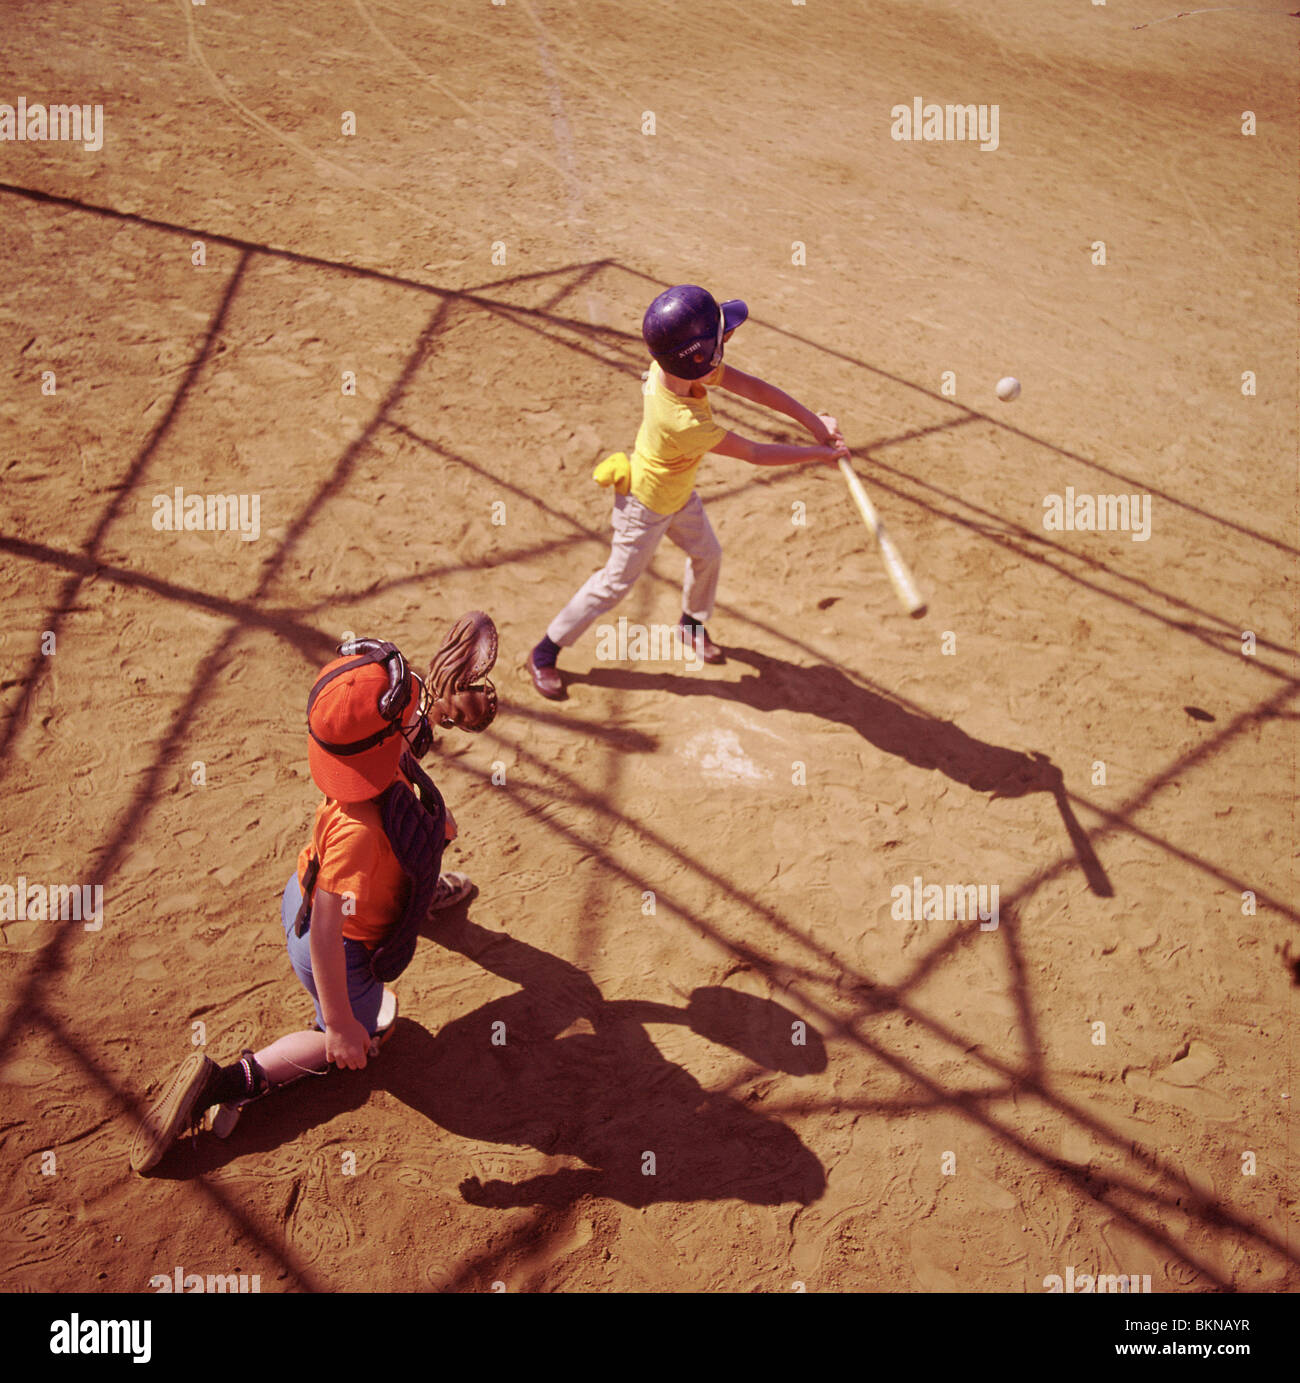 Overhead view of two boys playing in a baseball game Stock Photo